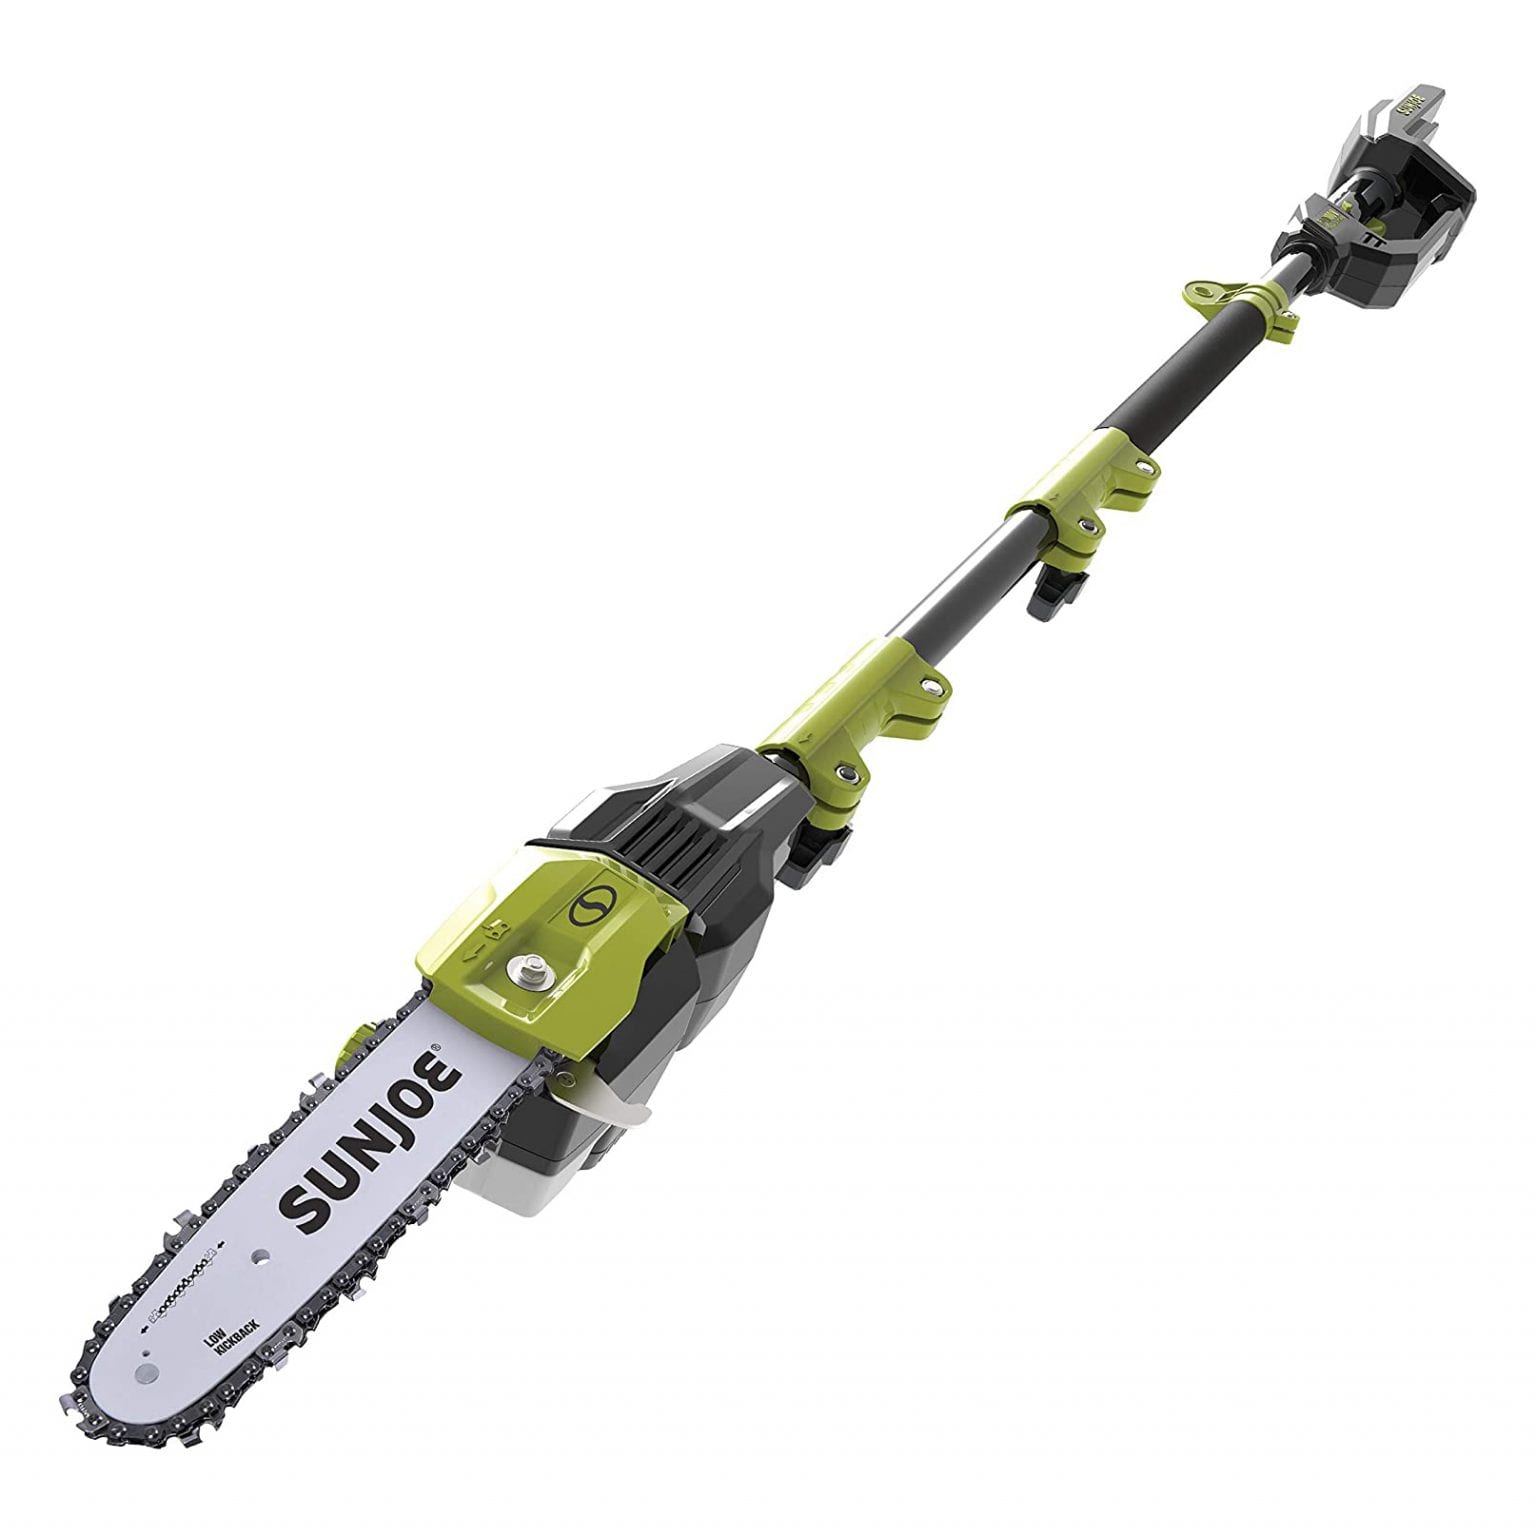 Top 10 Best Electric Pole Saws in 2023 Reviews Buyer's Guide